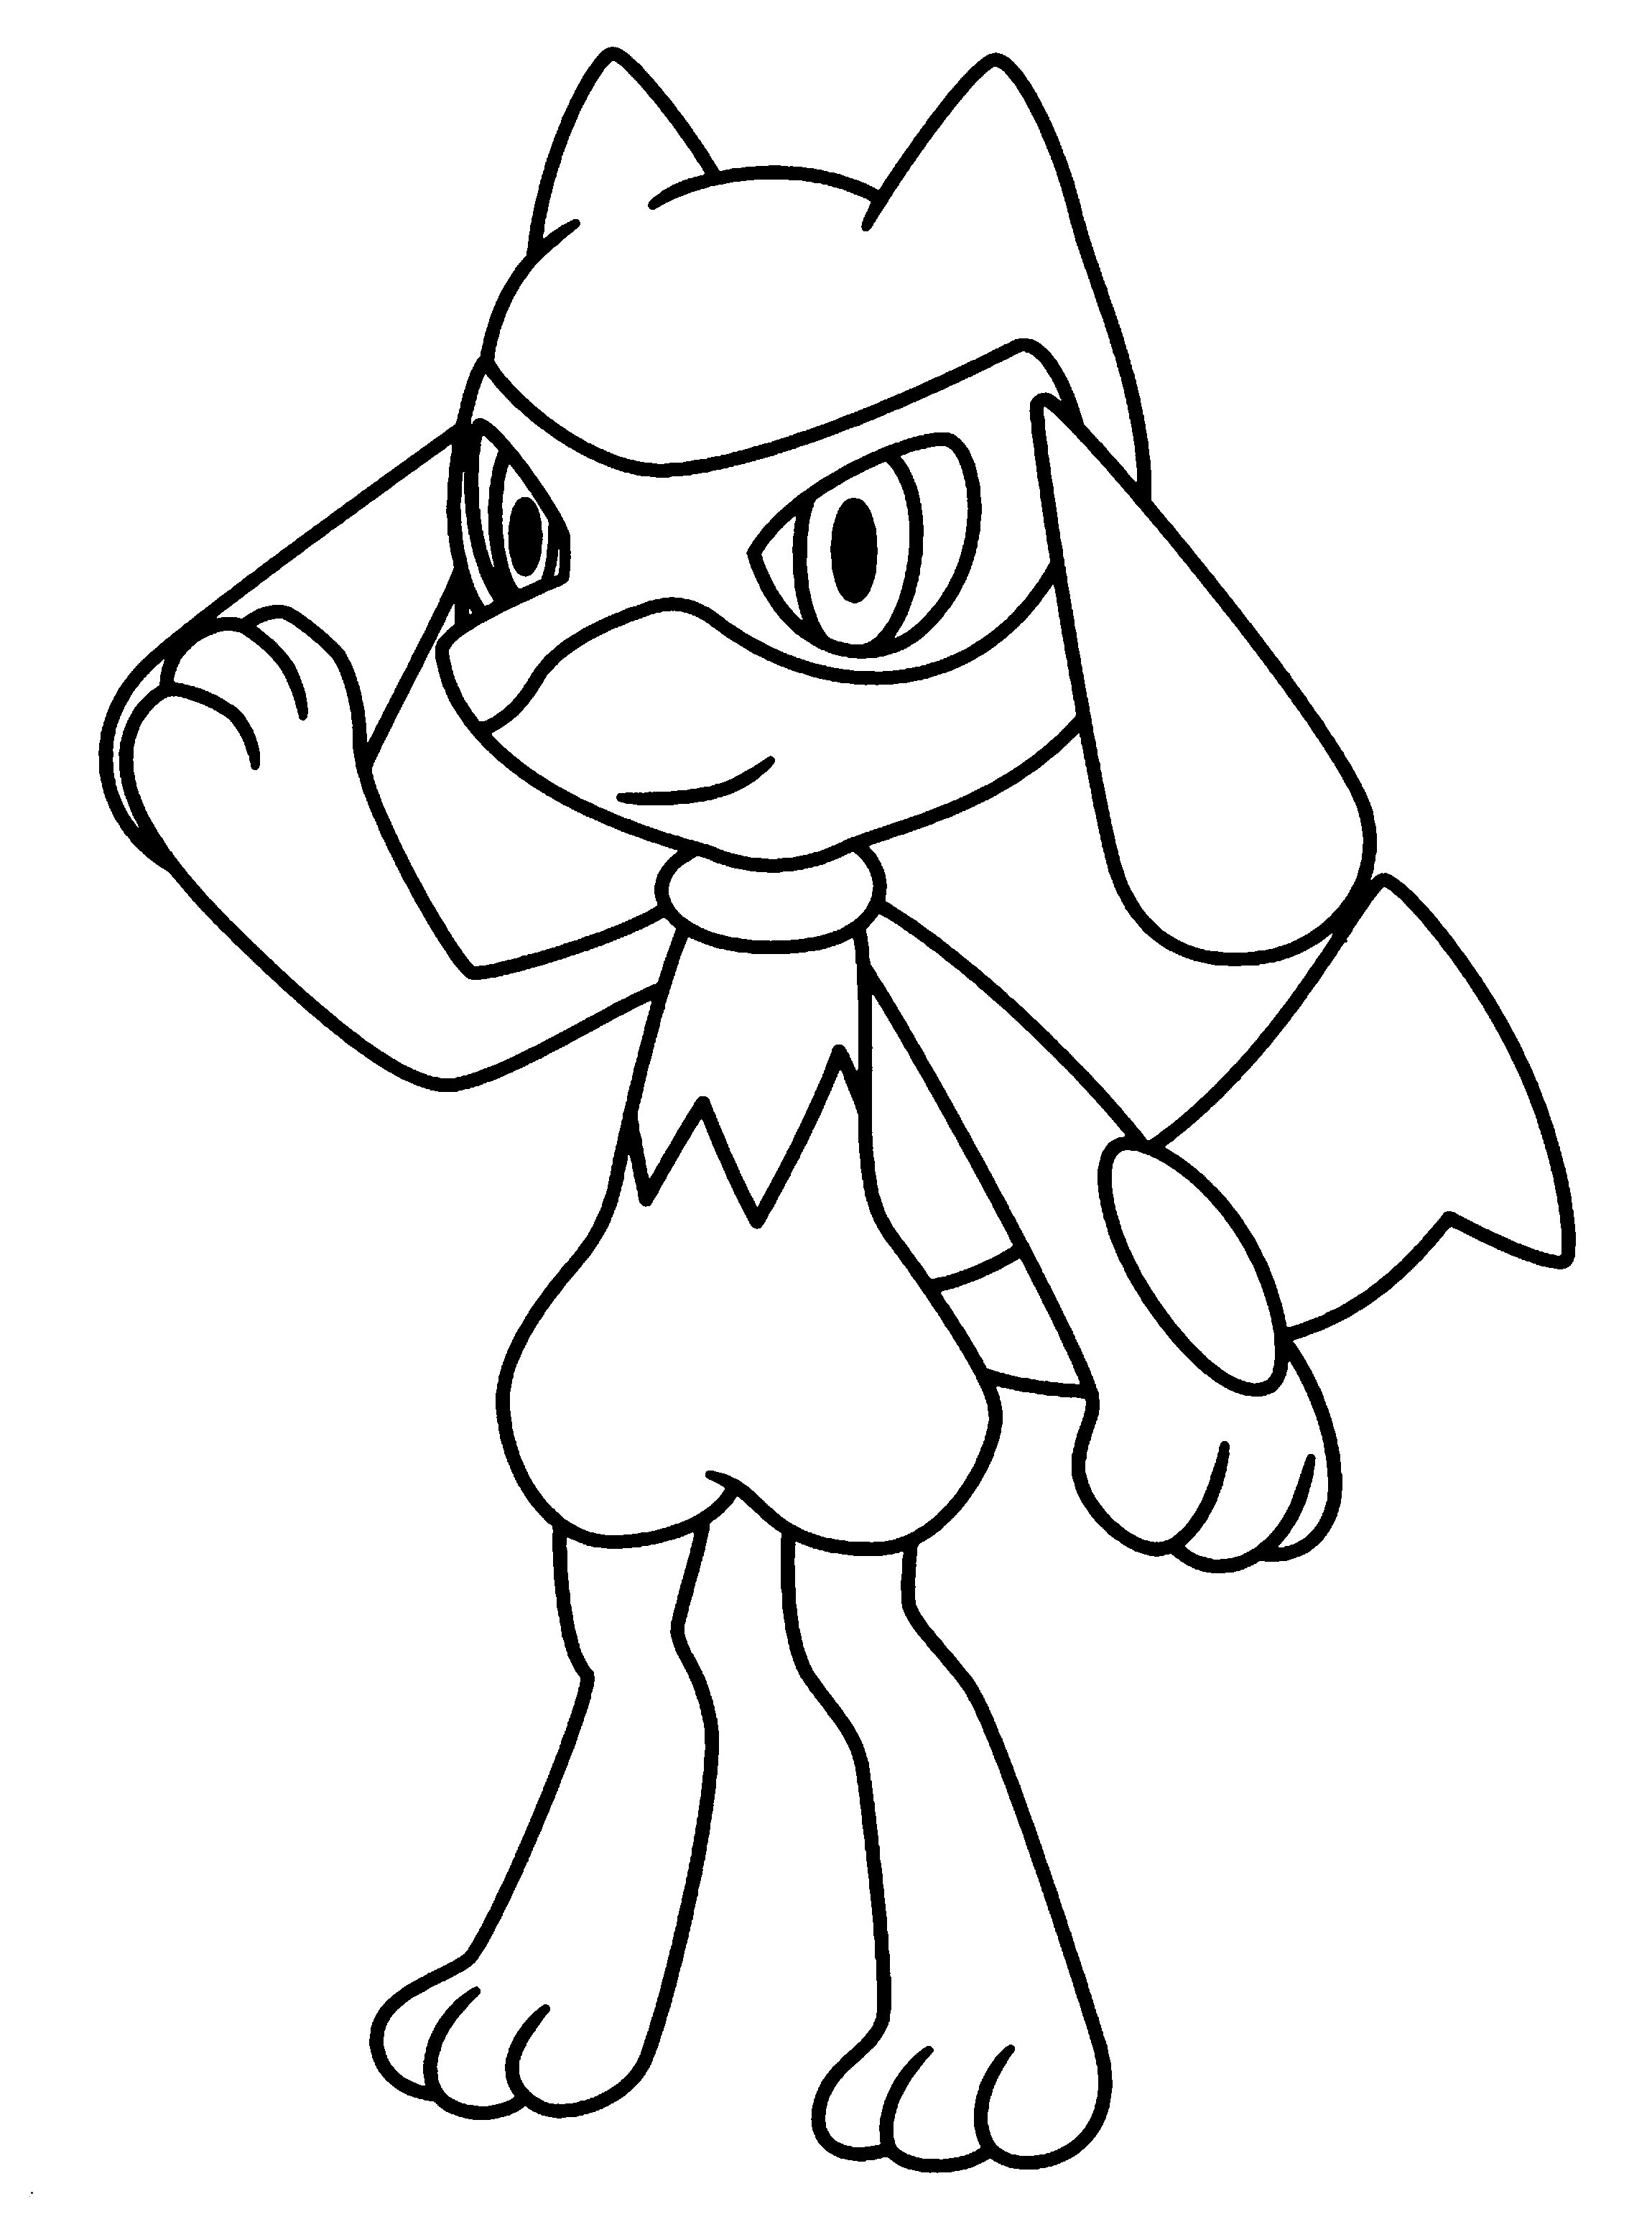 Angry Mega Lucario Coloring Page Free Printable Coloring Pages For Kids ...